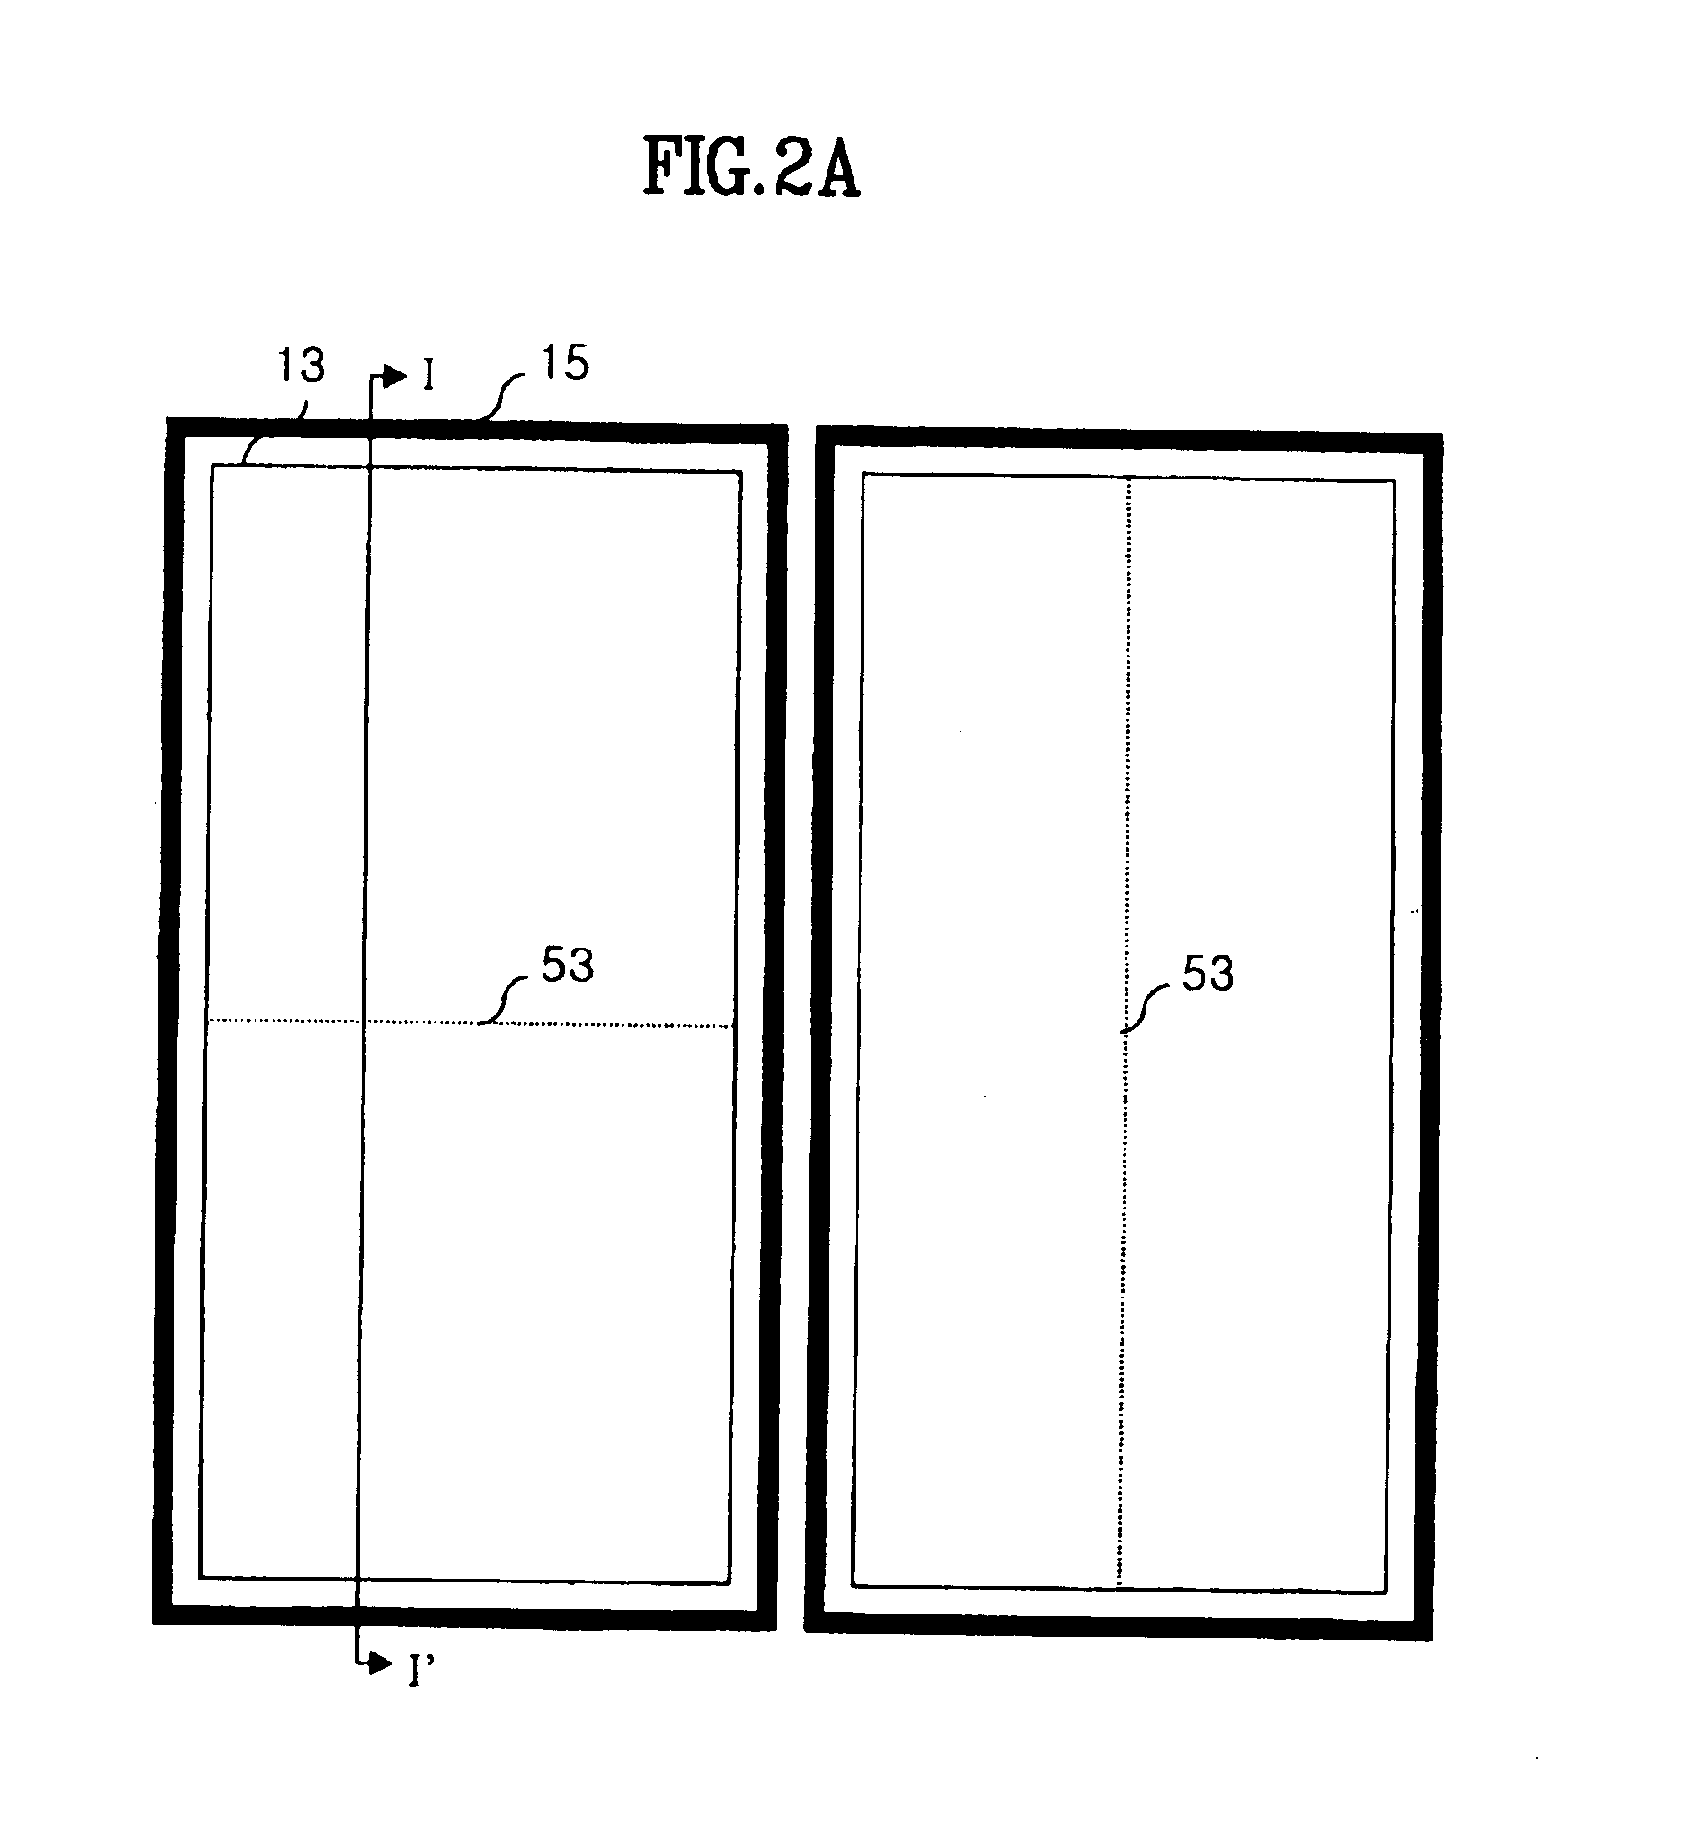 Multi-domain liquid crystal display device having a common-auxiliary electrode and dielectric structures